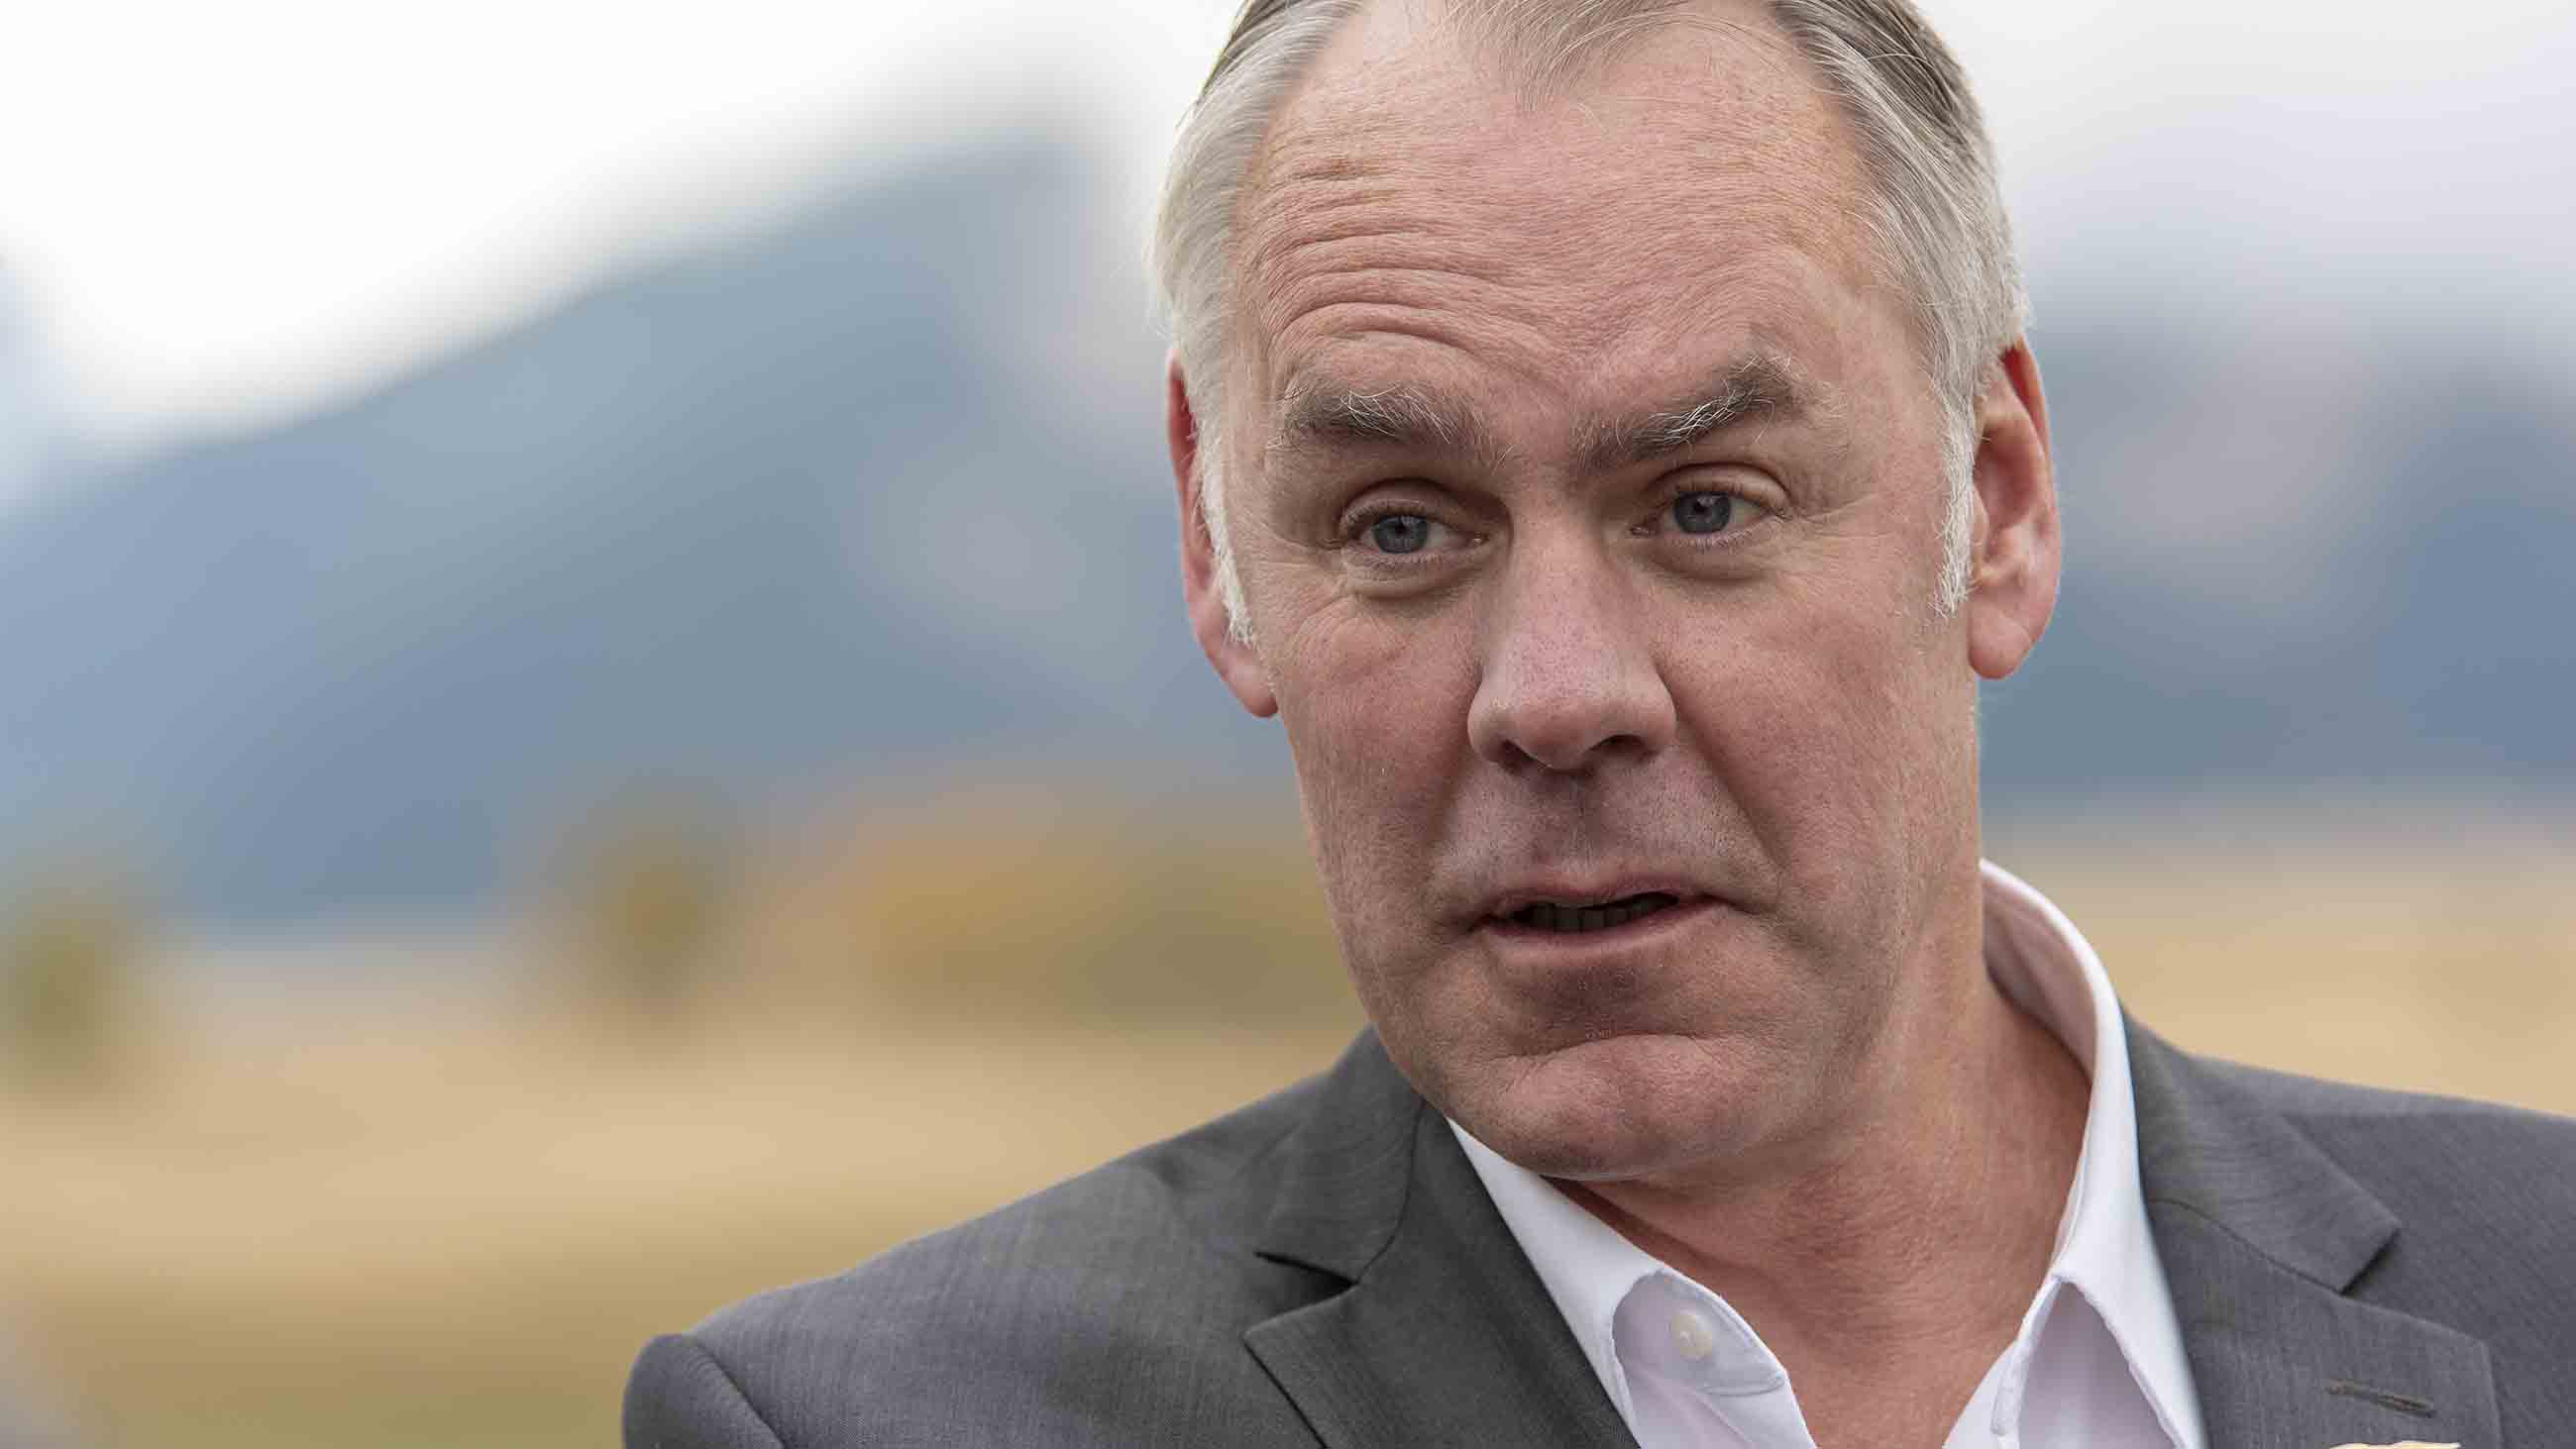 Interior Secretary Ryan Zinke is facing numerous federal inquiries, including one that may rise to the level of criminal investigation.